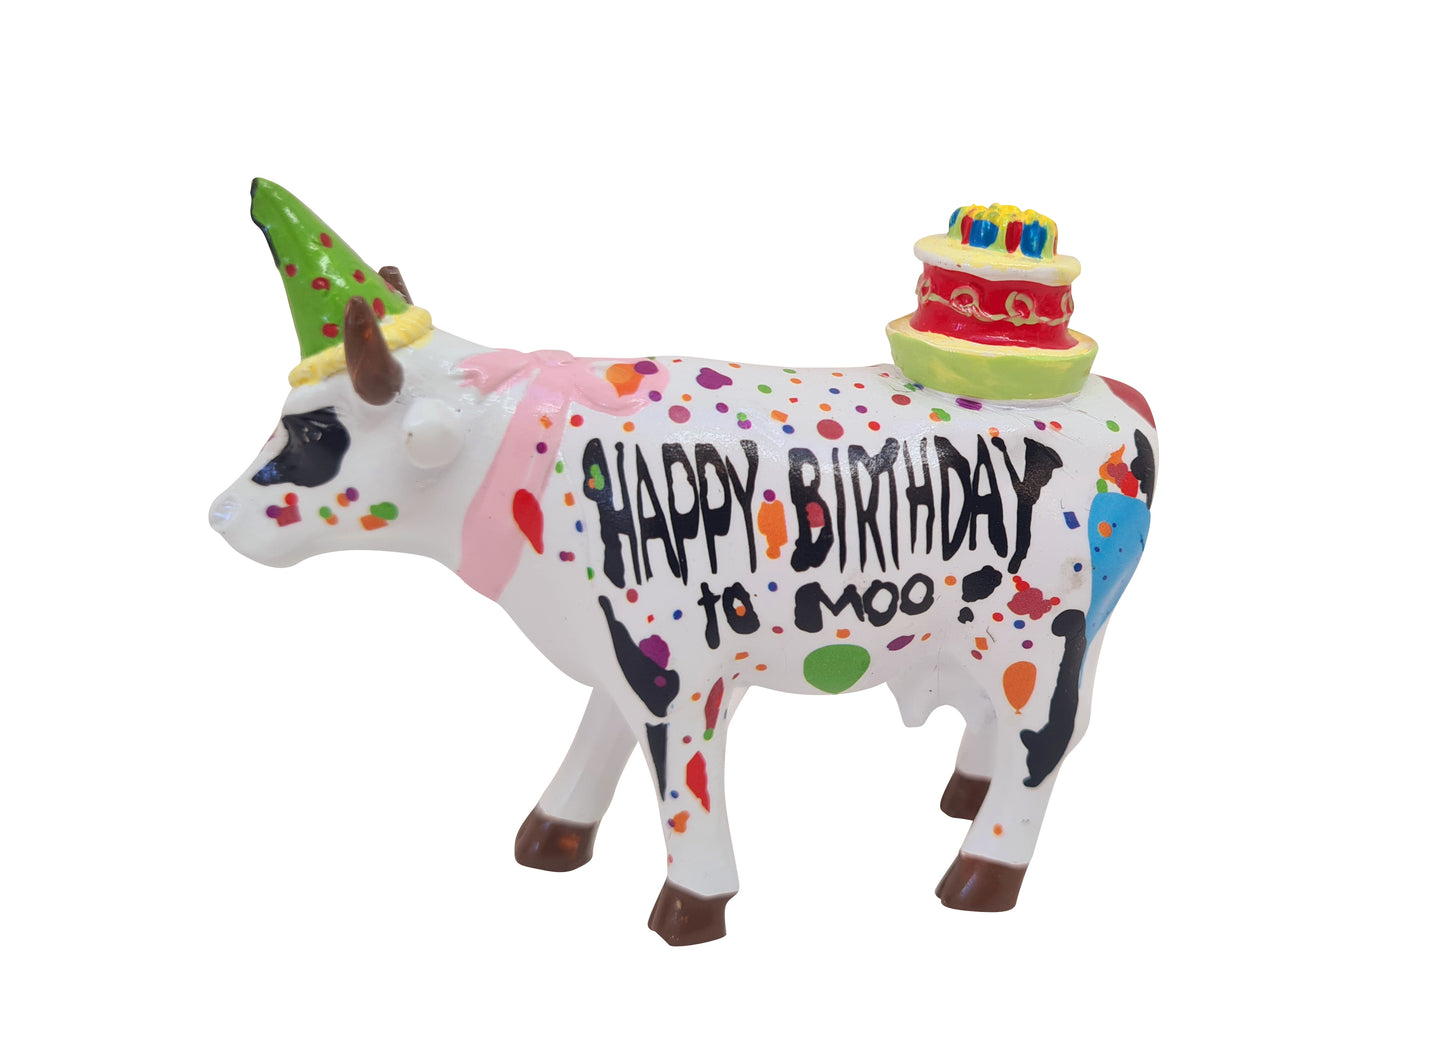 Small statue Cow Parade "Happy Birthday", ceramic. Length 2'5 inches (6.5 centimeters) 